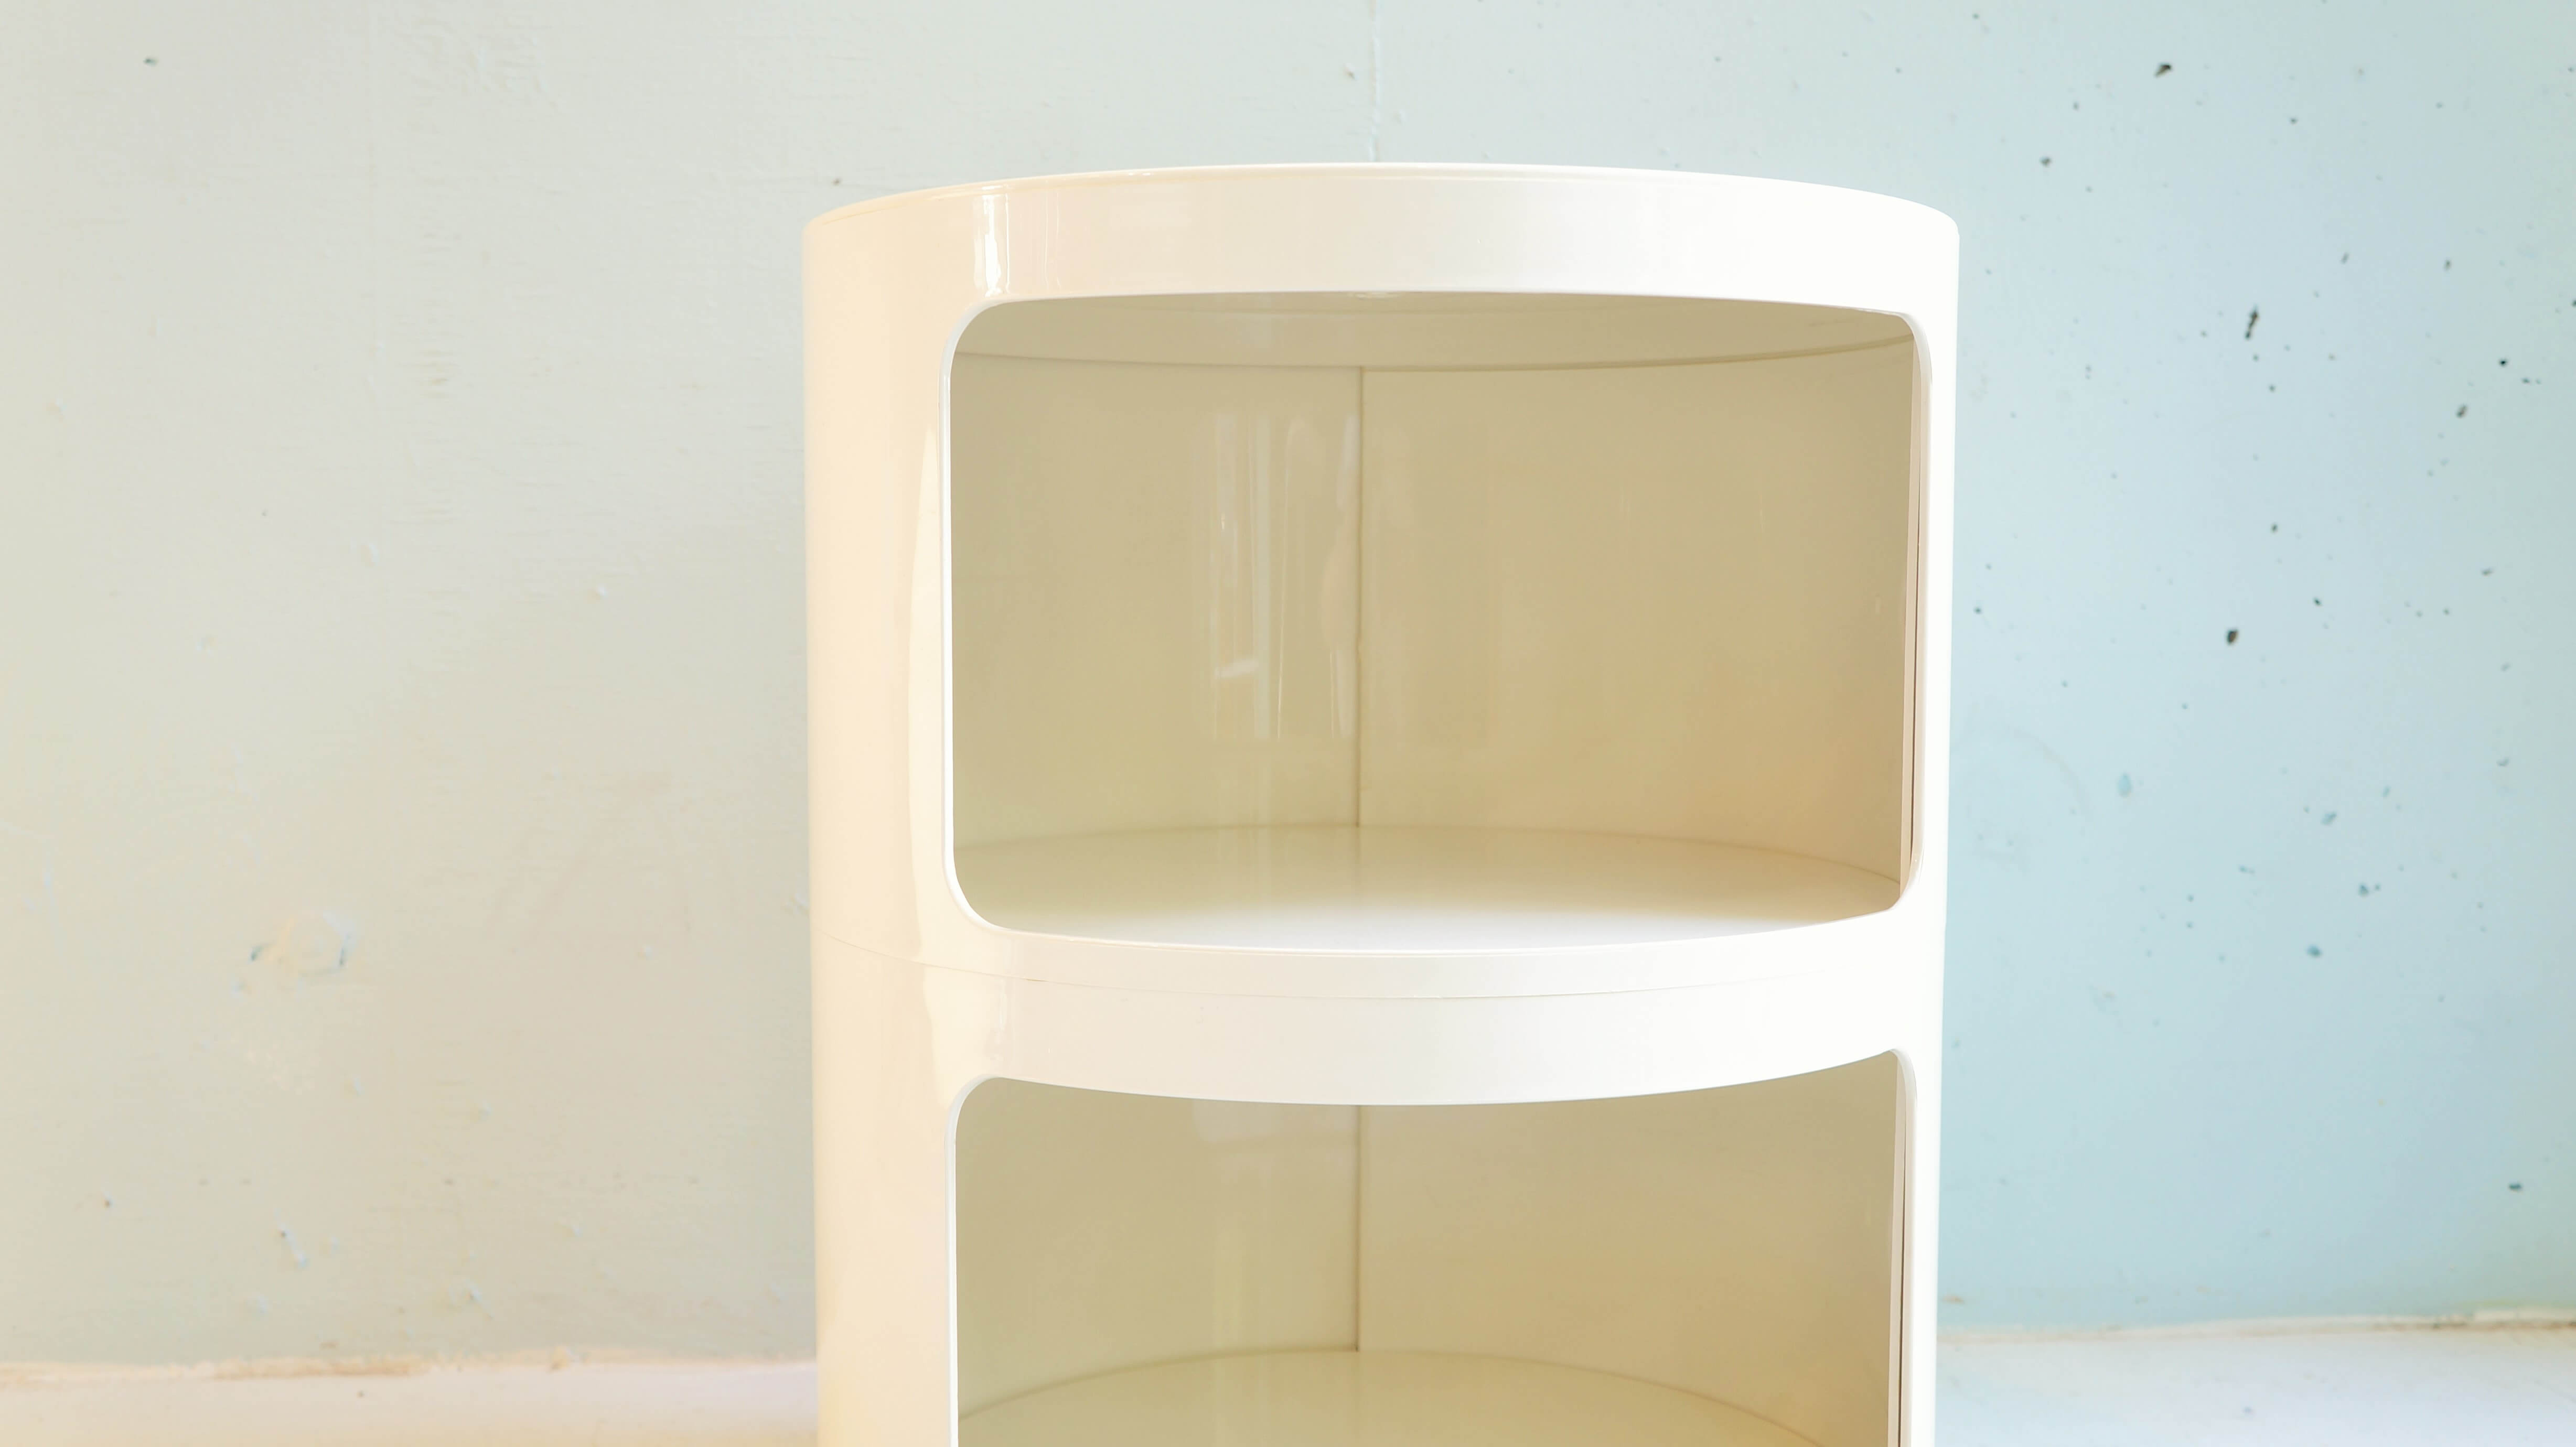 Kartell componibili 2 white designed by Anna Castelli Ferrieri/カルテル コンポニビリ2 白 アンナ・カステッリ・フェリエーリ デザイン